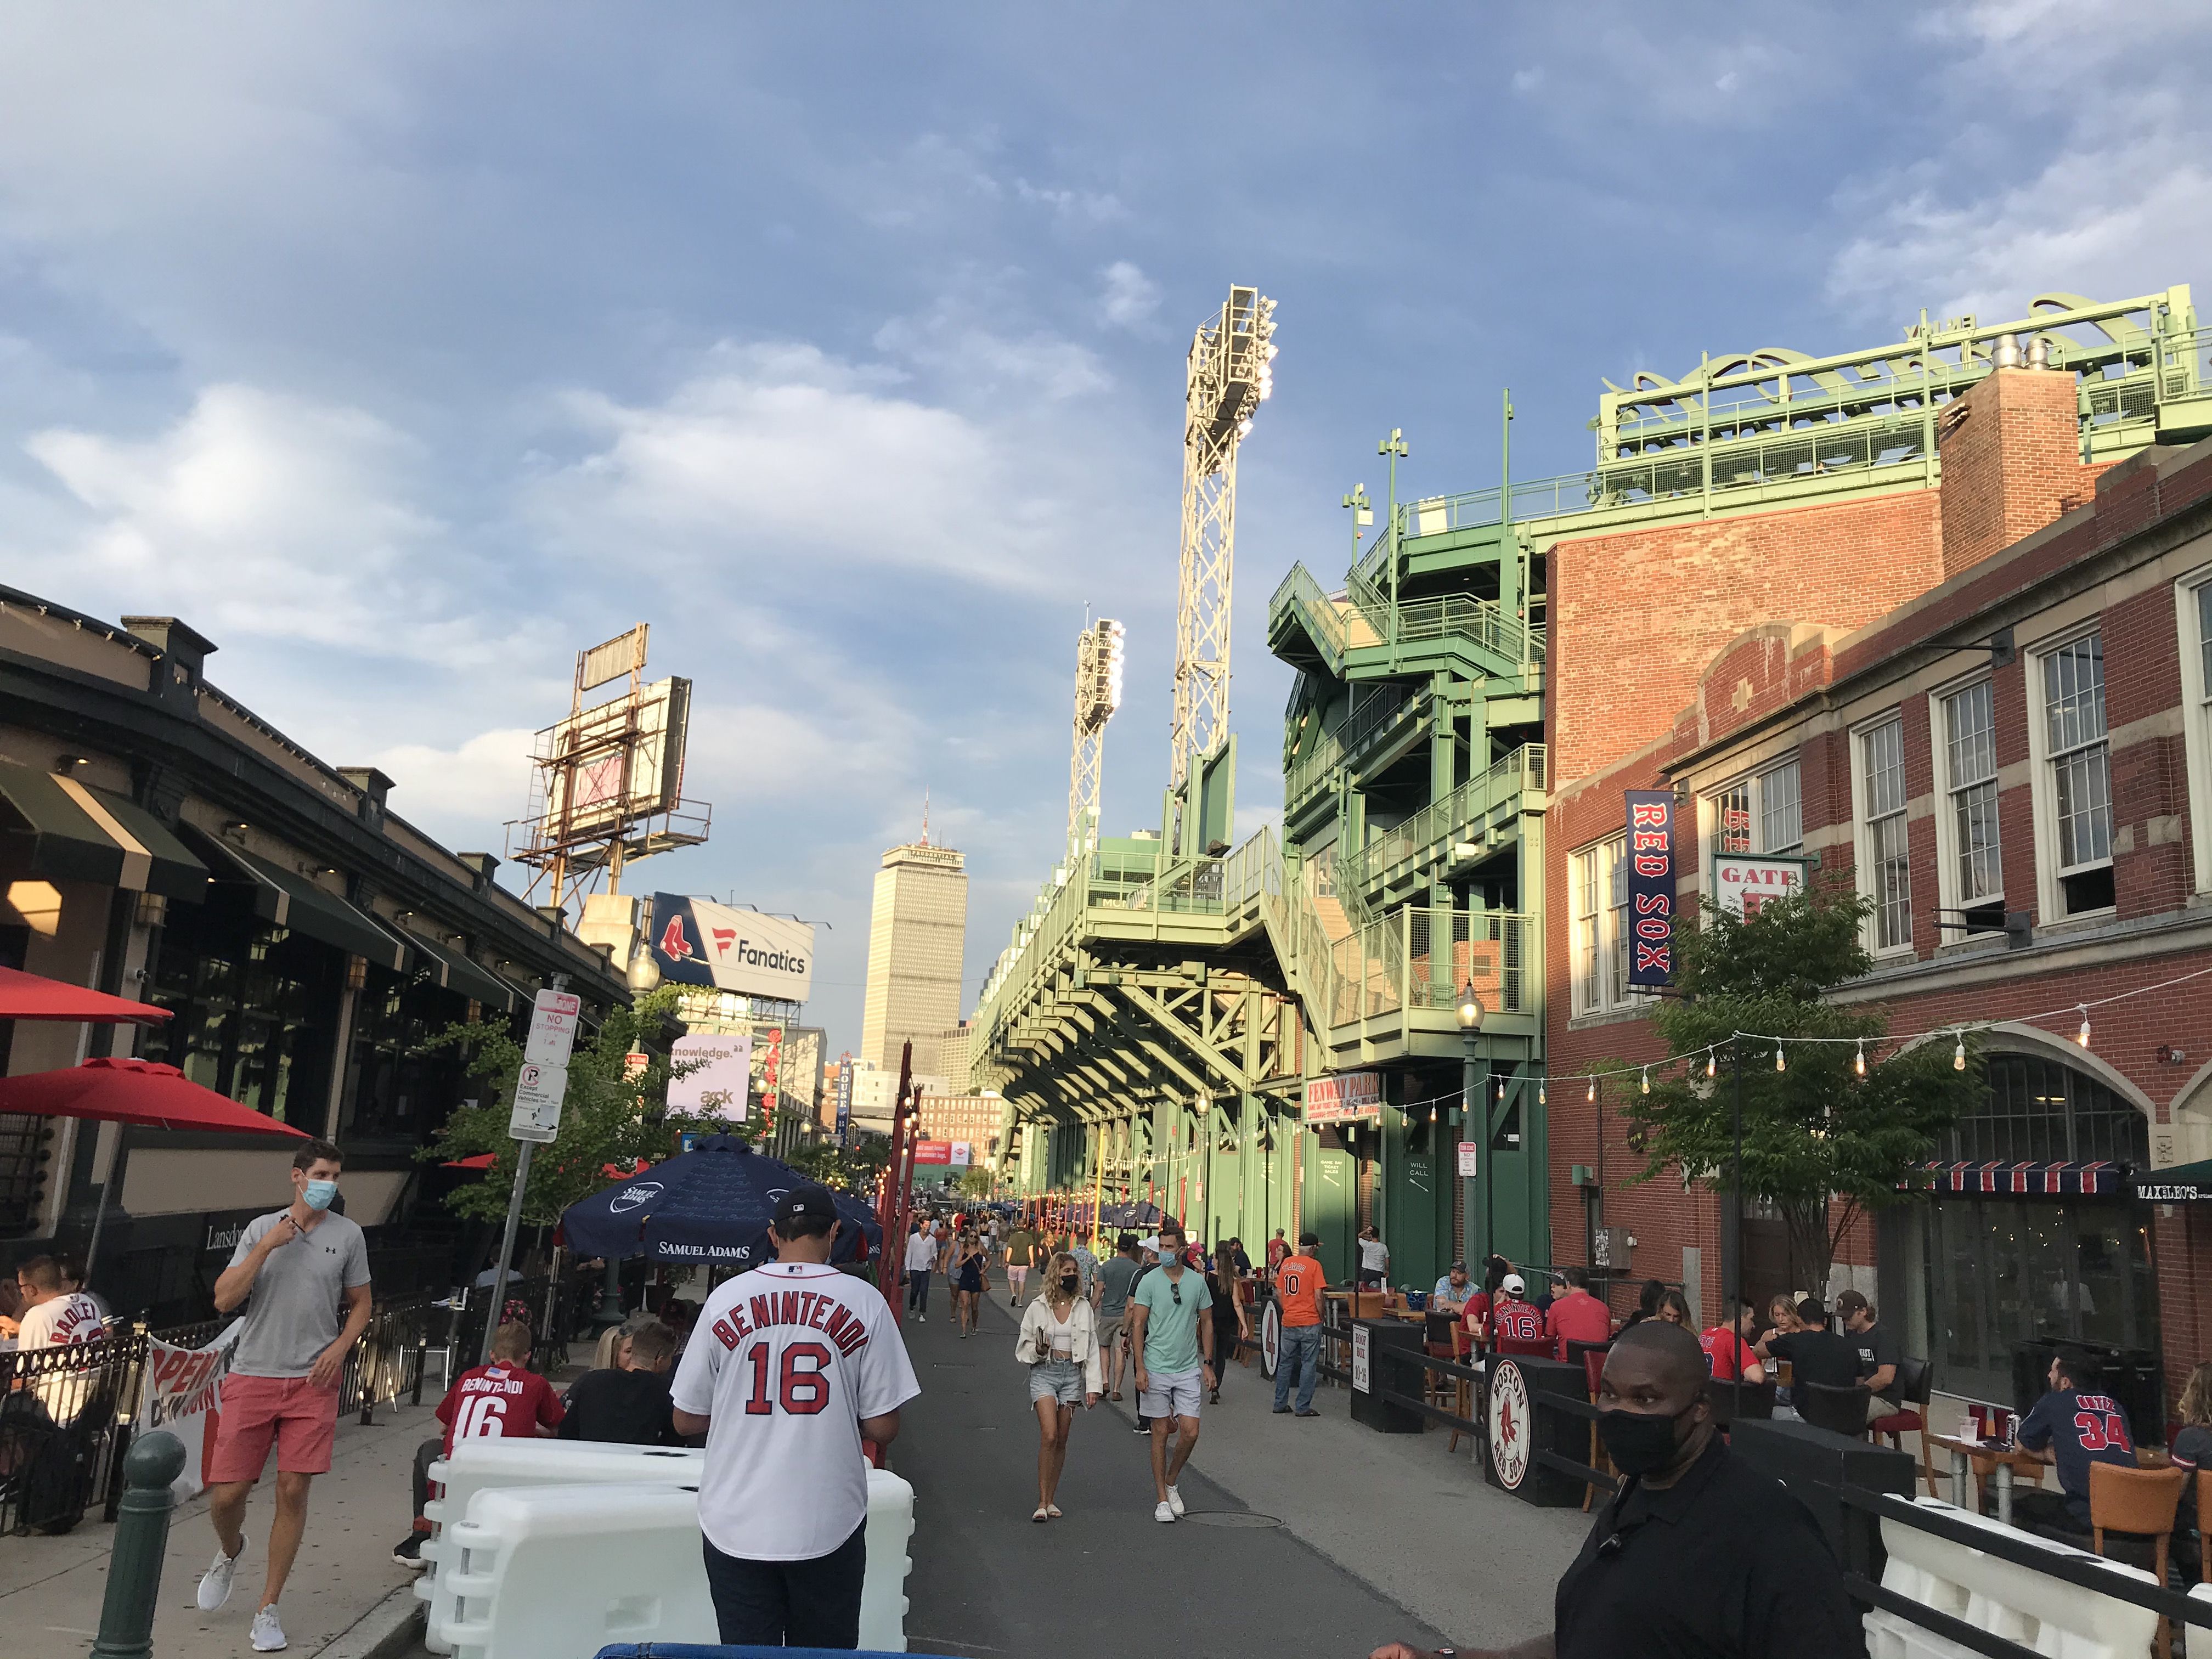 Red Sox Opening Day: With Fenway off limits, some fans welcomed back  baseball outside